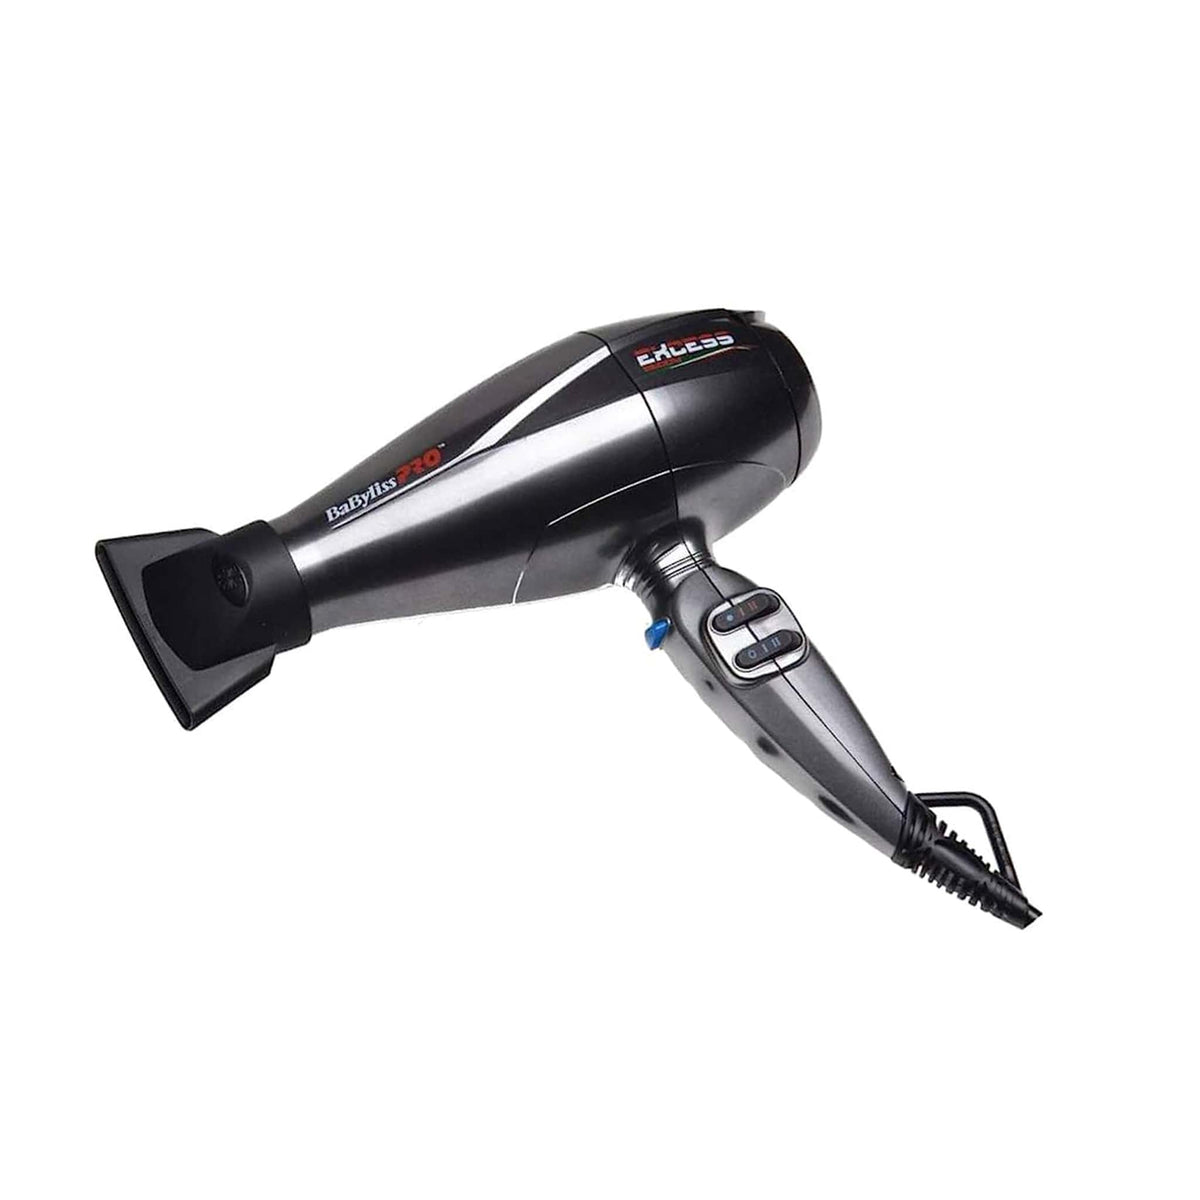 BabylissPro Excess HQ 2600W Hair Dryer